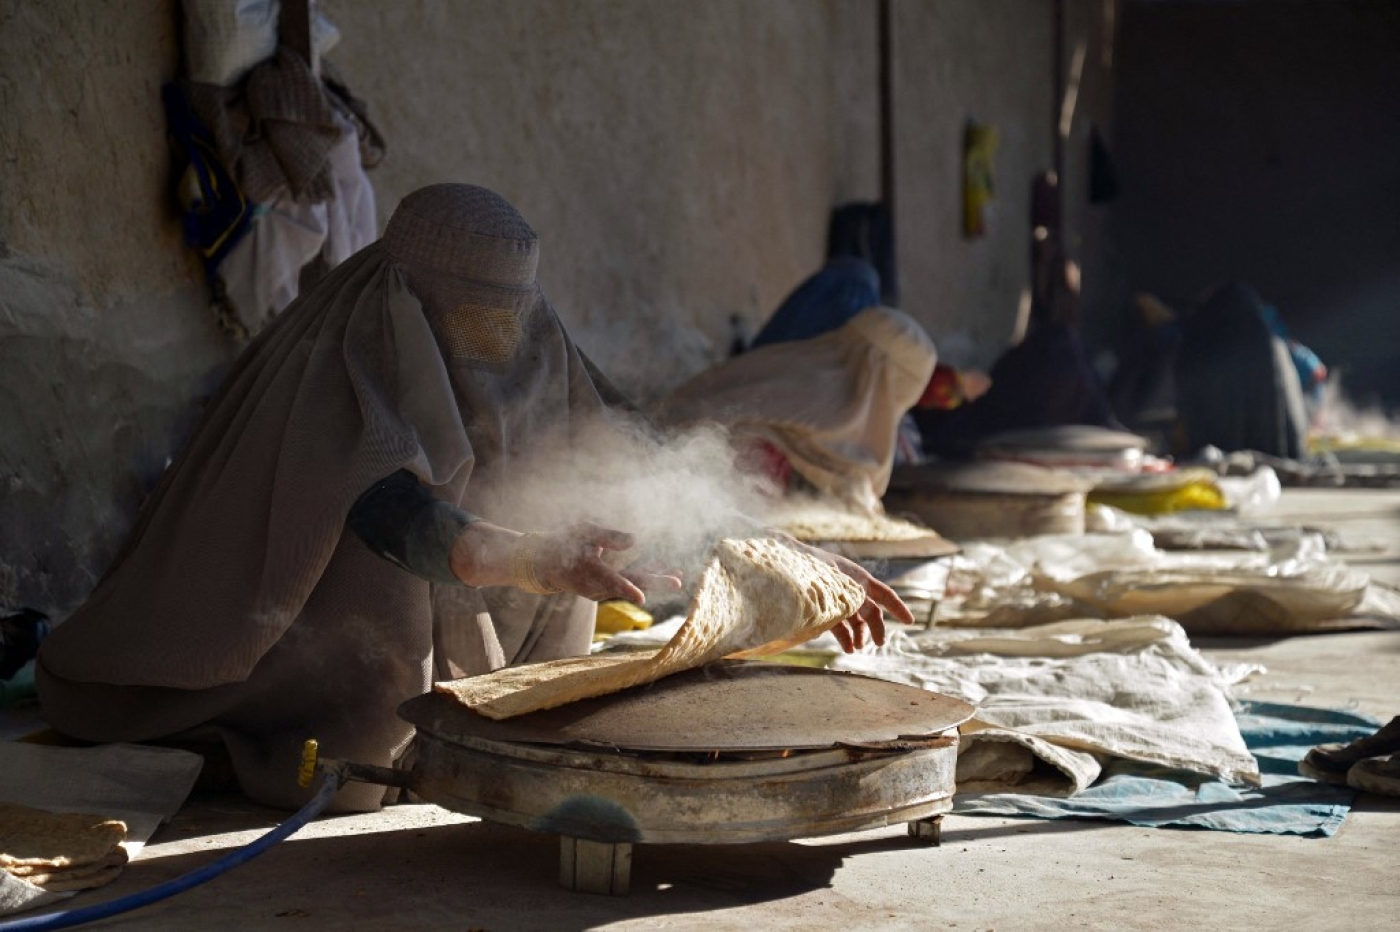 Afghan women workers prepare bread at a workplace to sell in a market in Kandahar on January 5, 2023. (AFP)